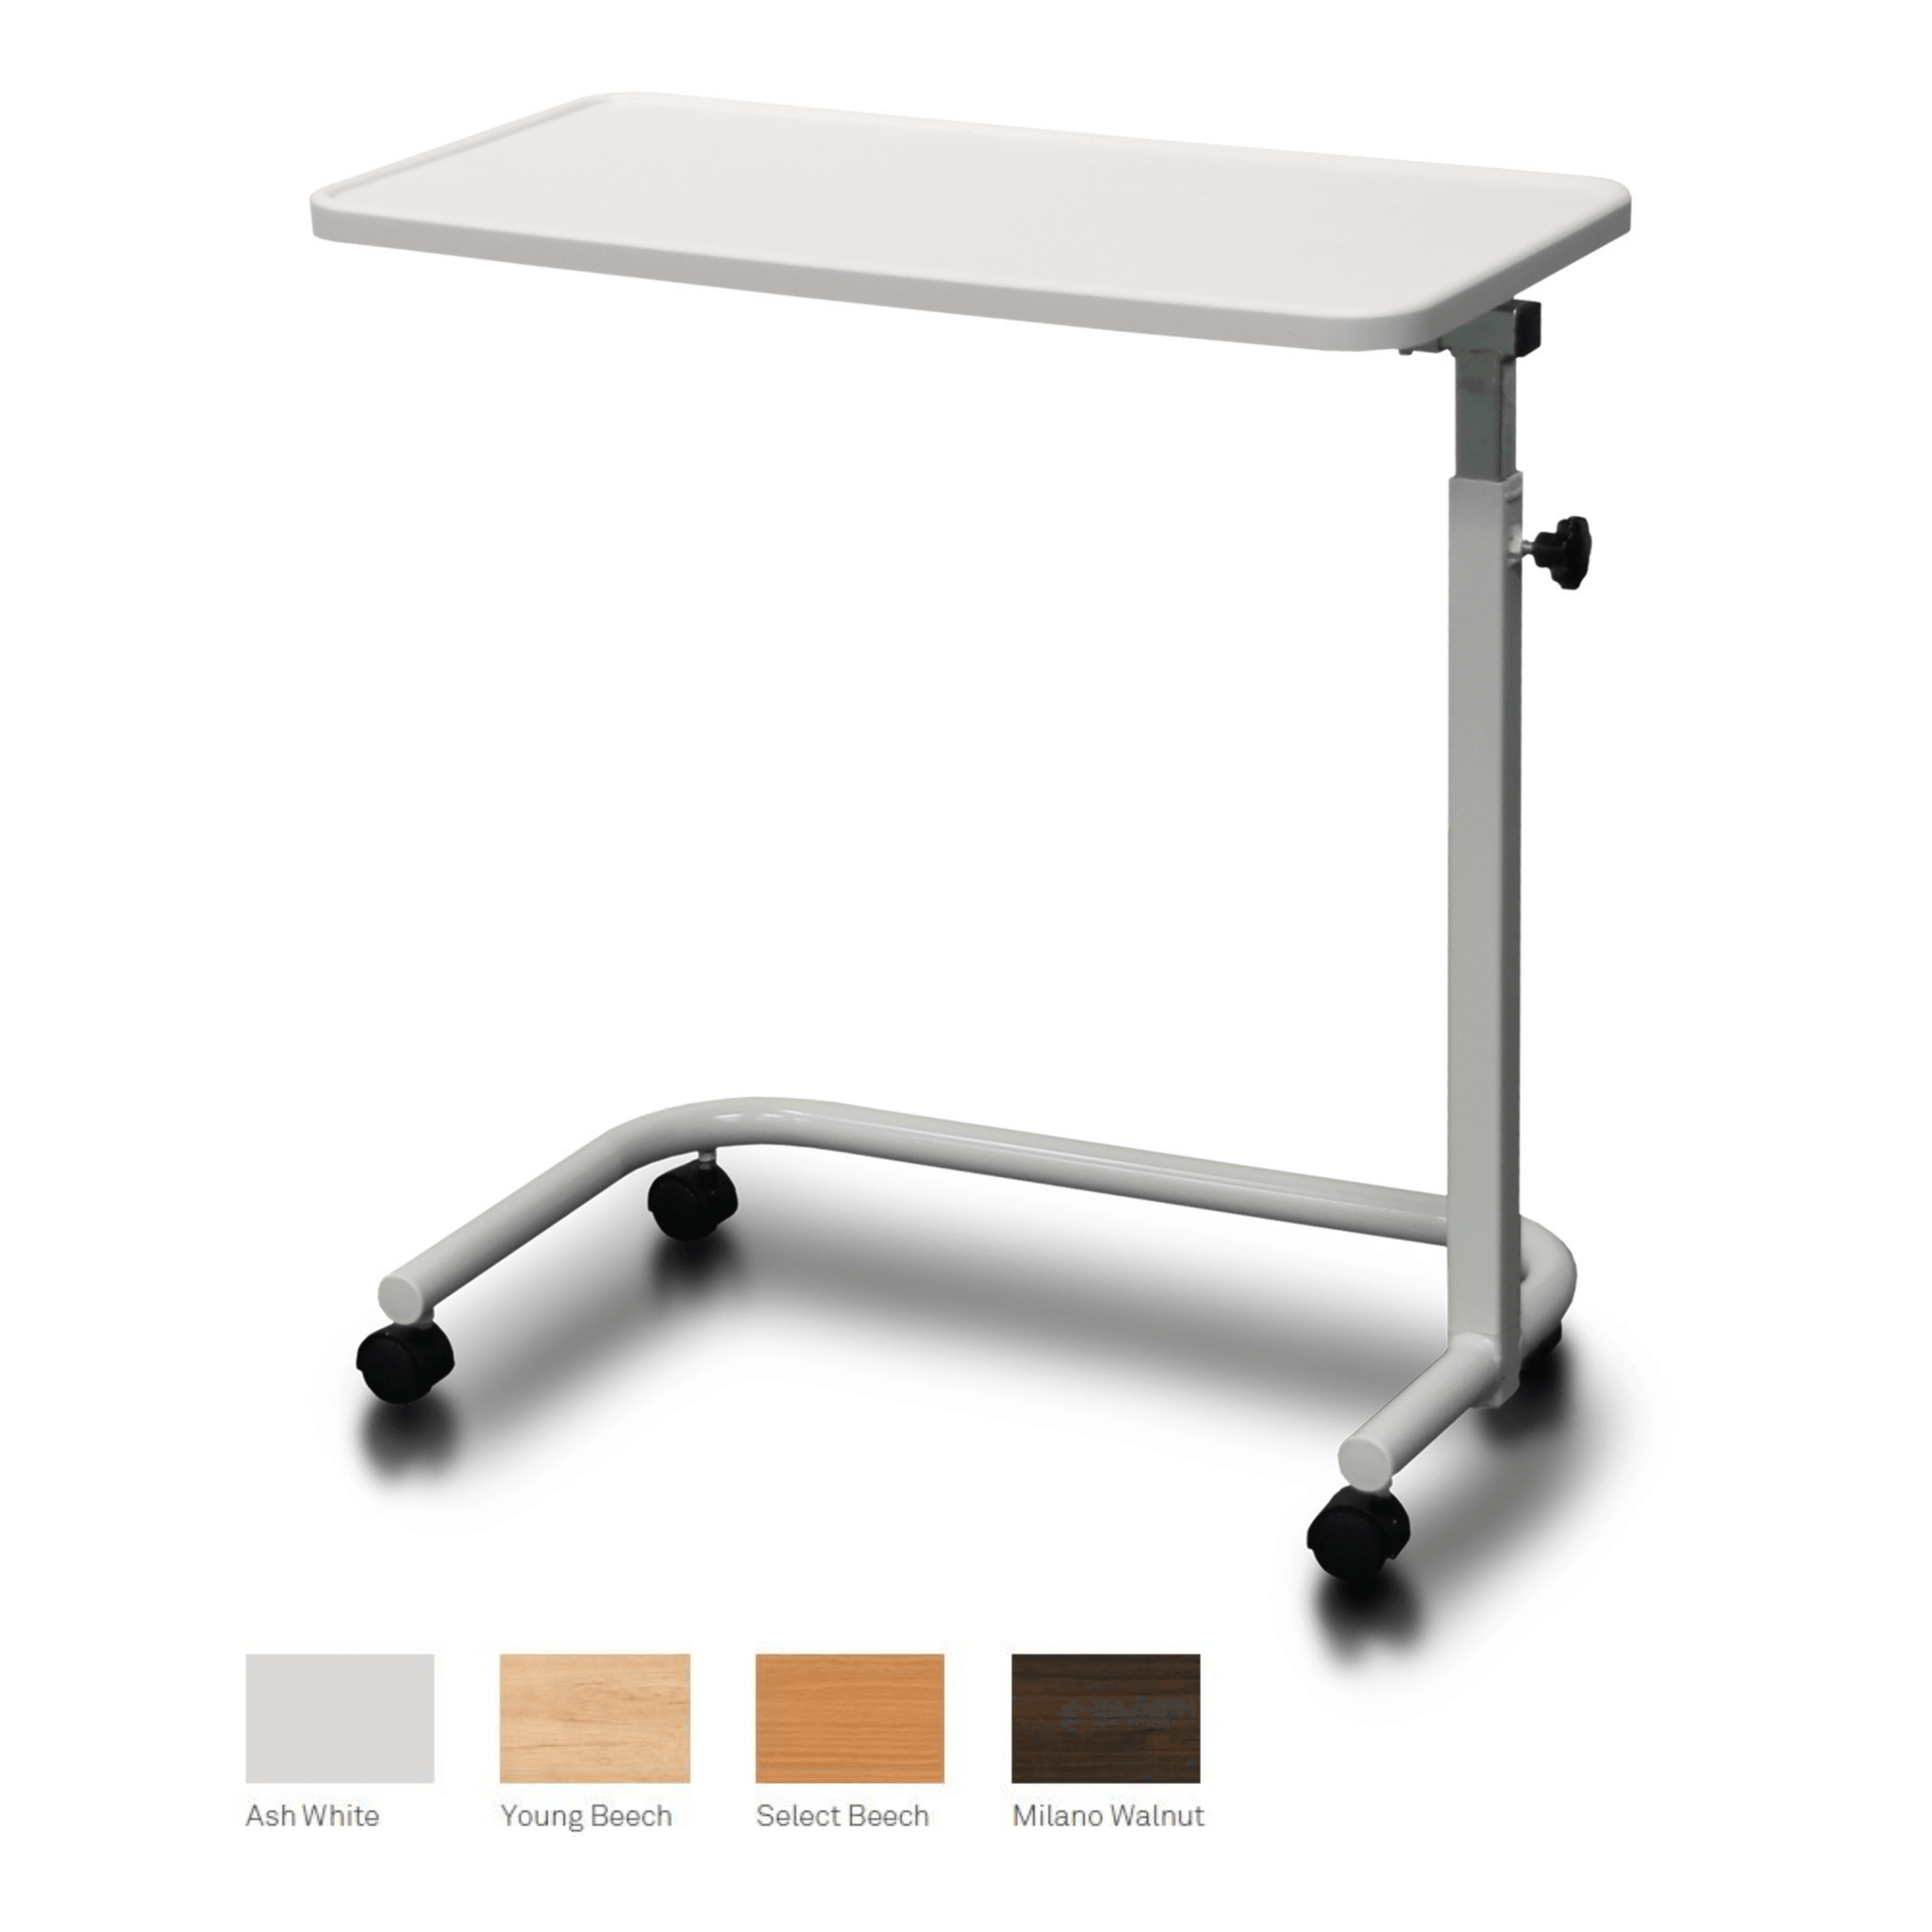 Fixed Top Overbed Table- Manual Height Adjustment, Young Beech - 2